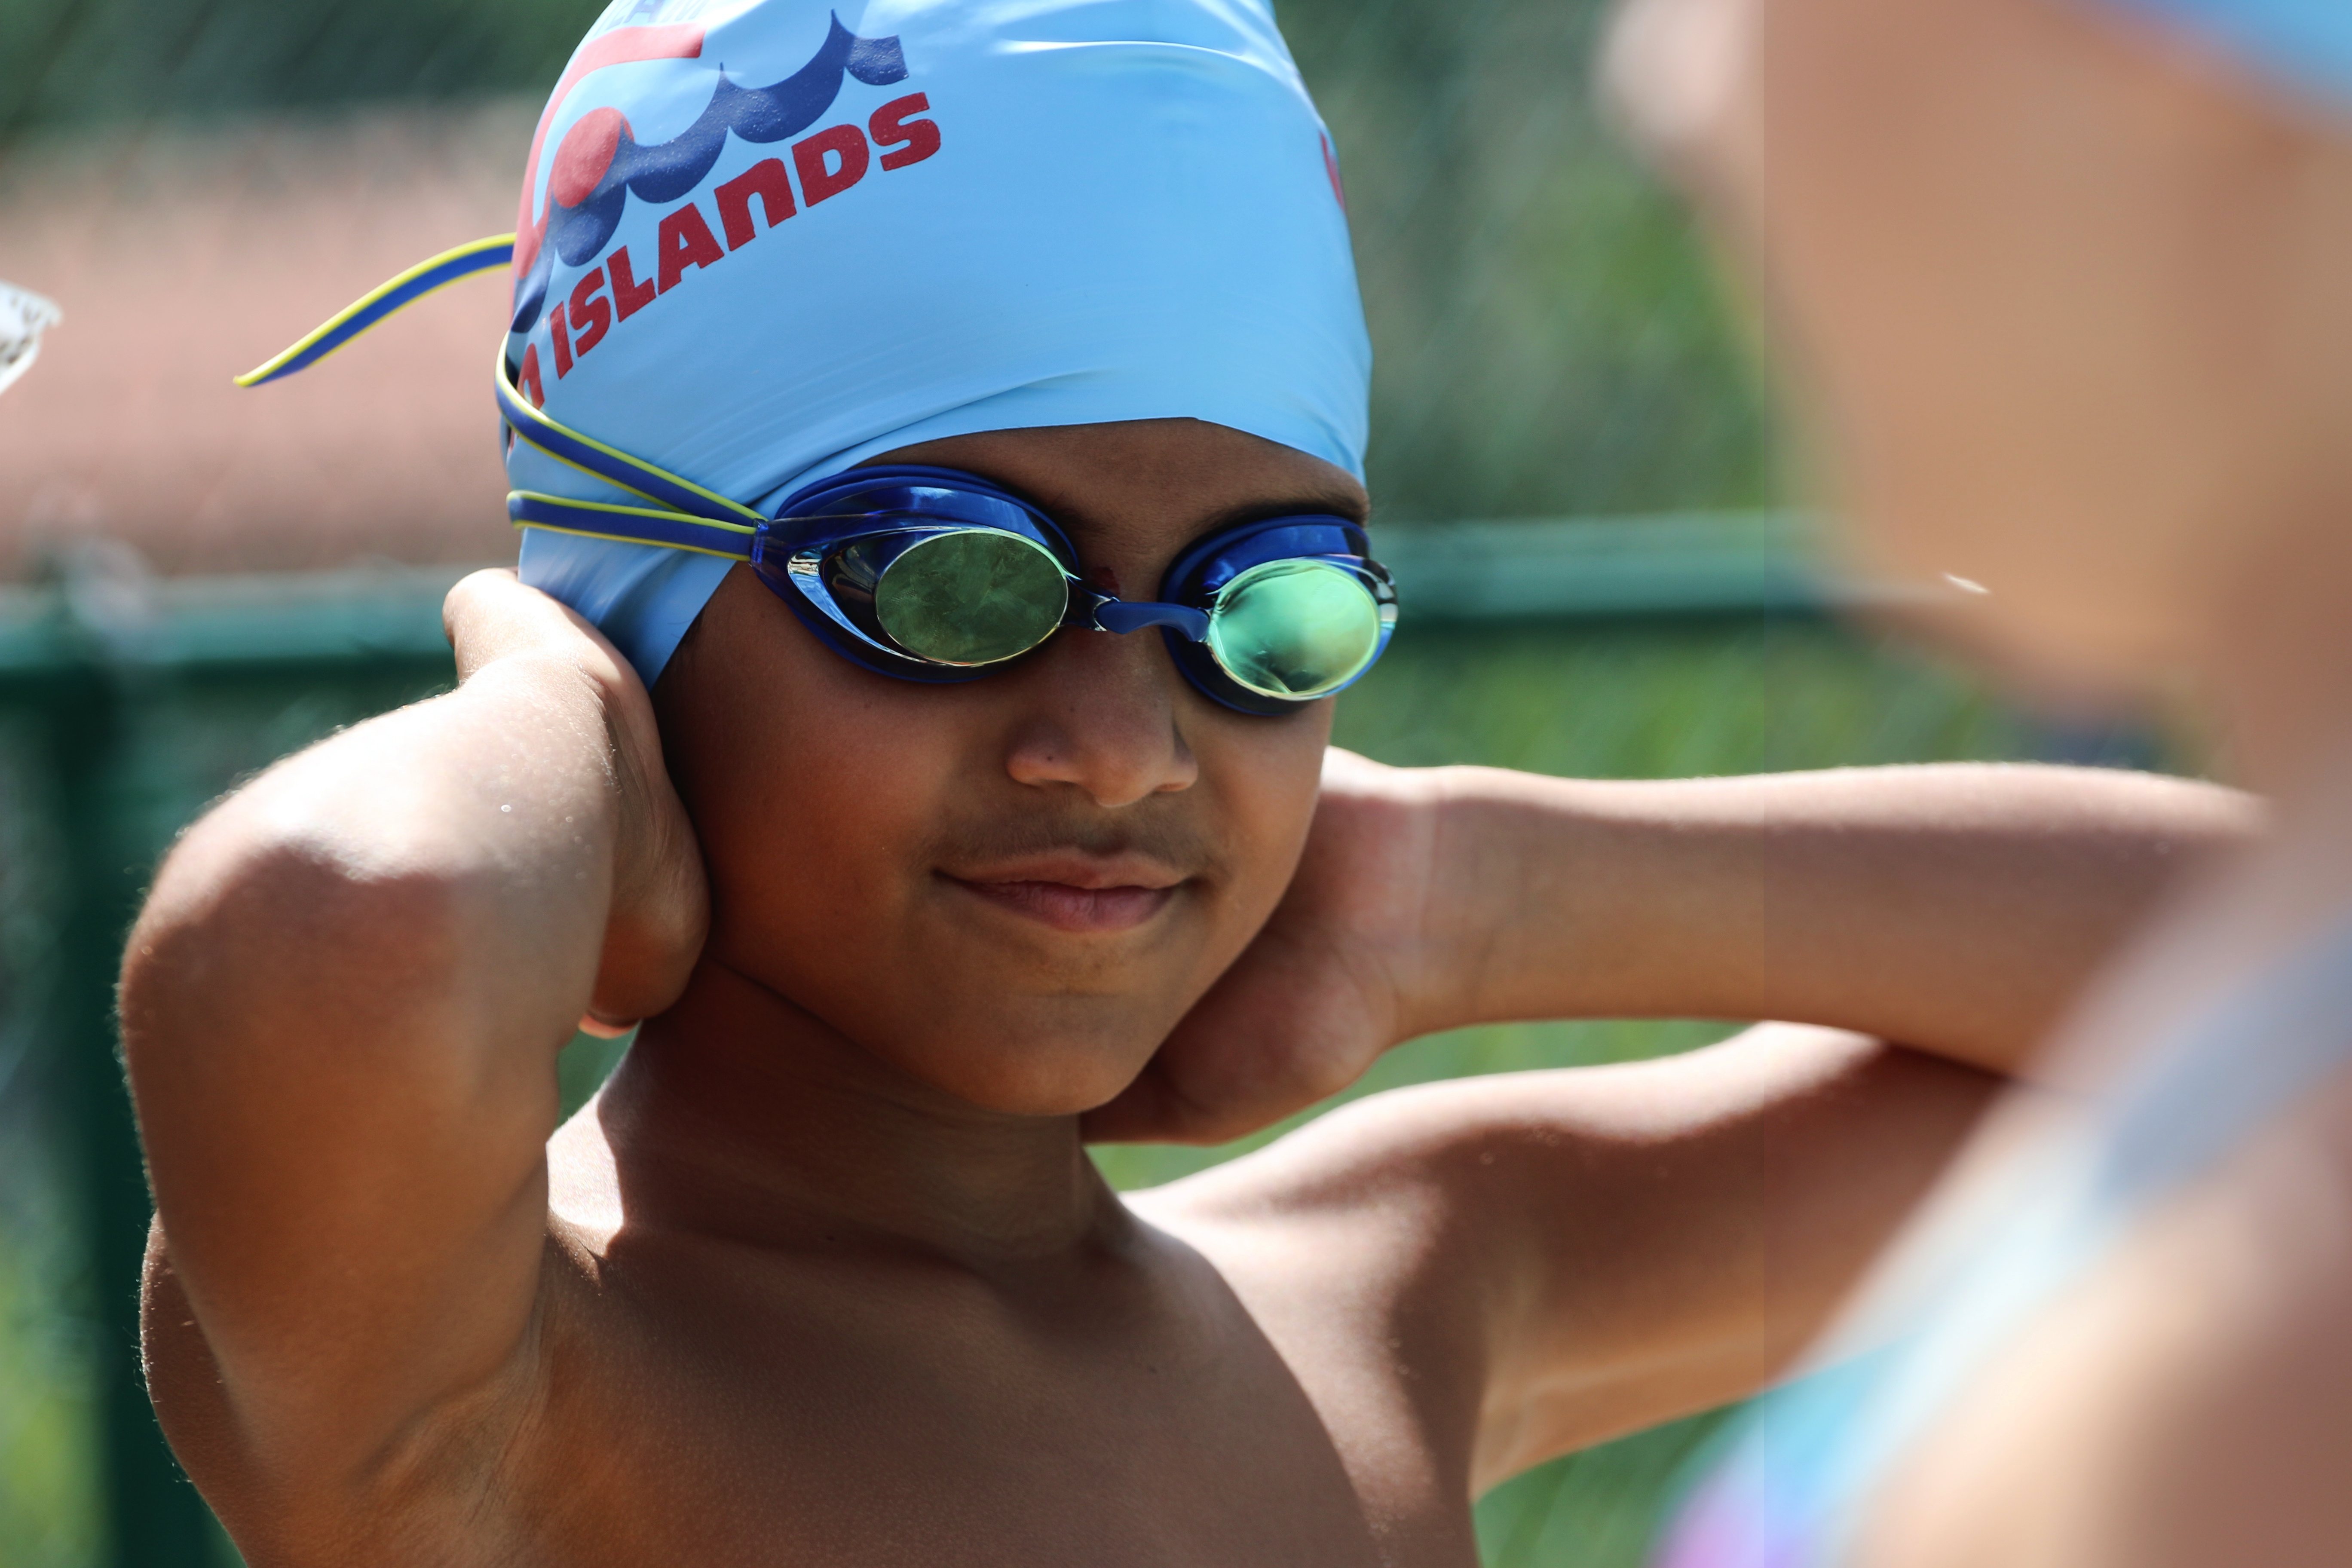 A young Stingray gets ready to compete Saturday at the STSA Swim Meet.